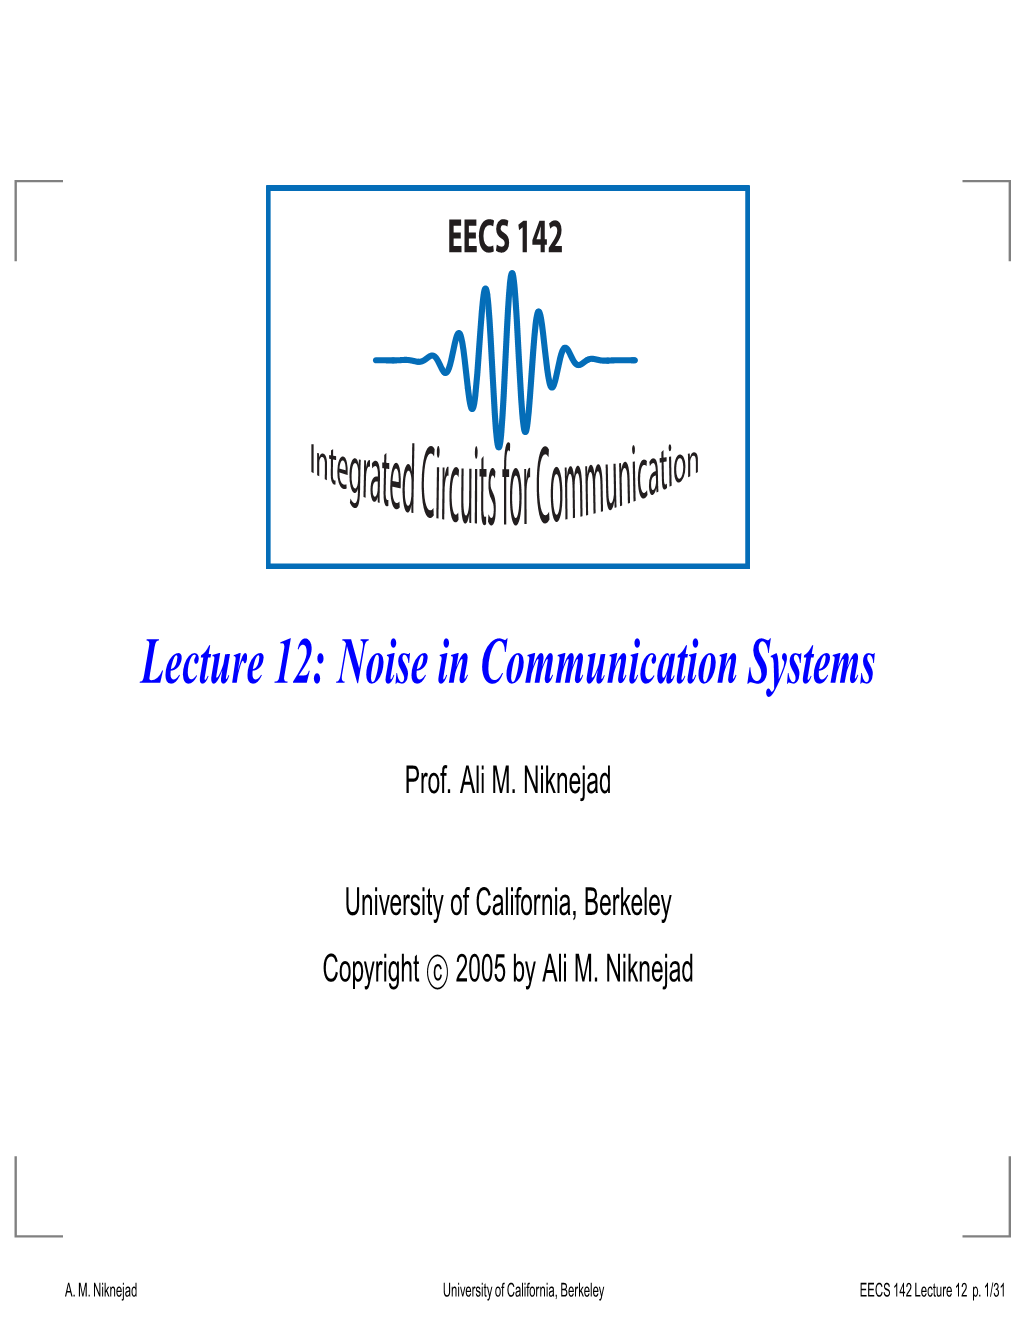 Noise in Communication Systems